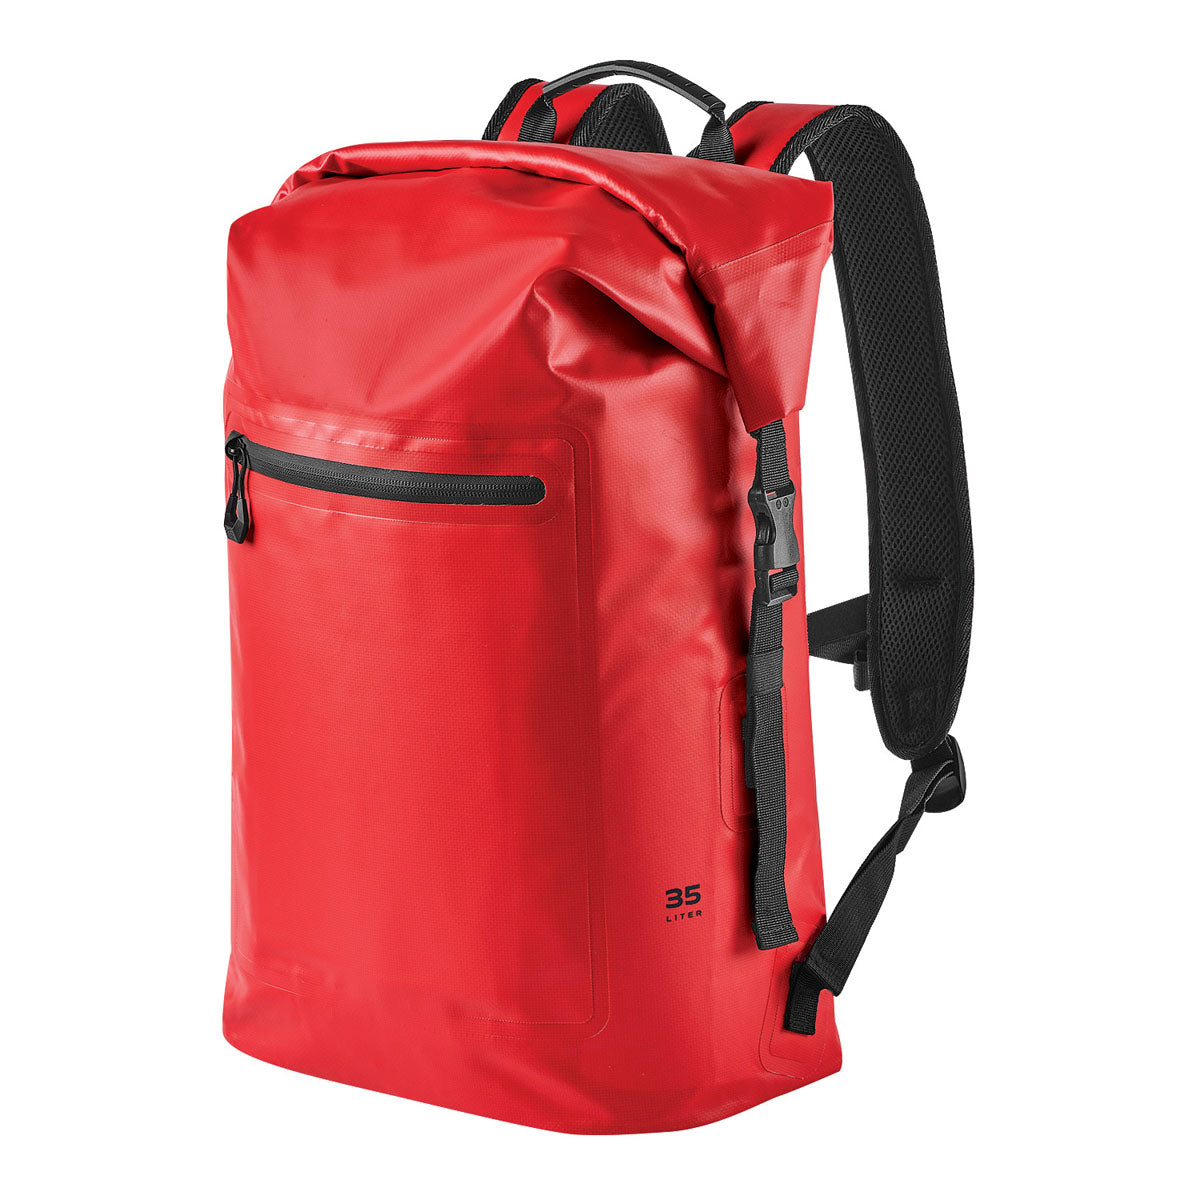 Cirrus Backpack 35 - Stormtech Canada Retail